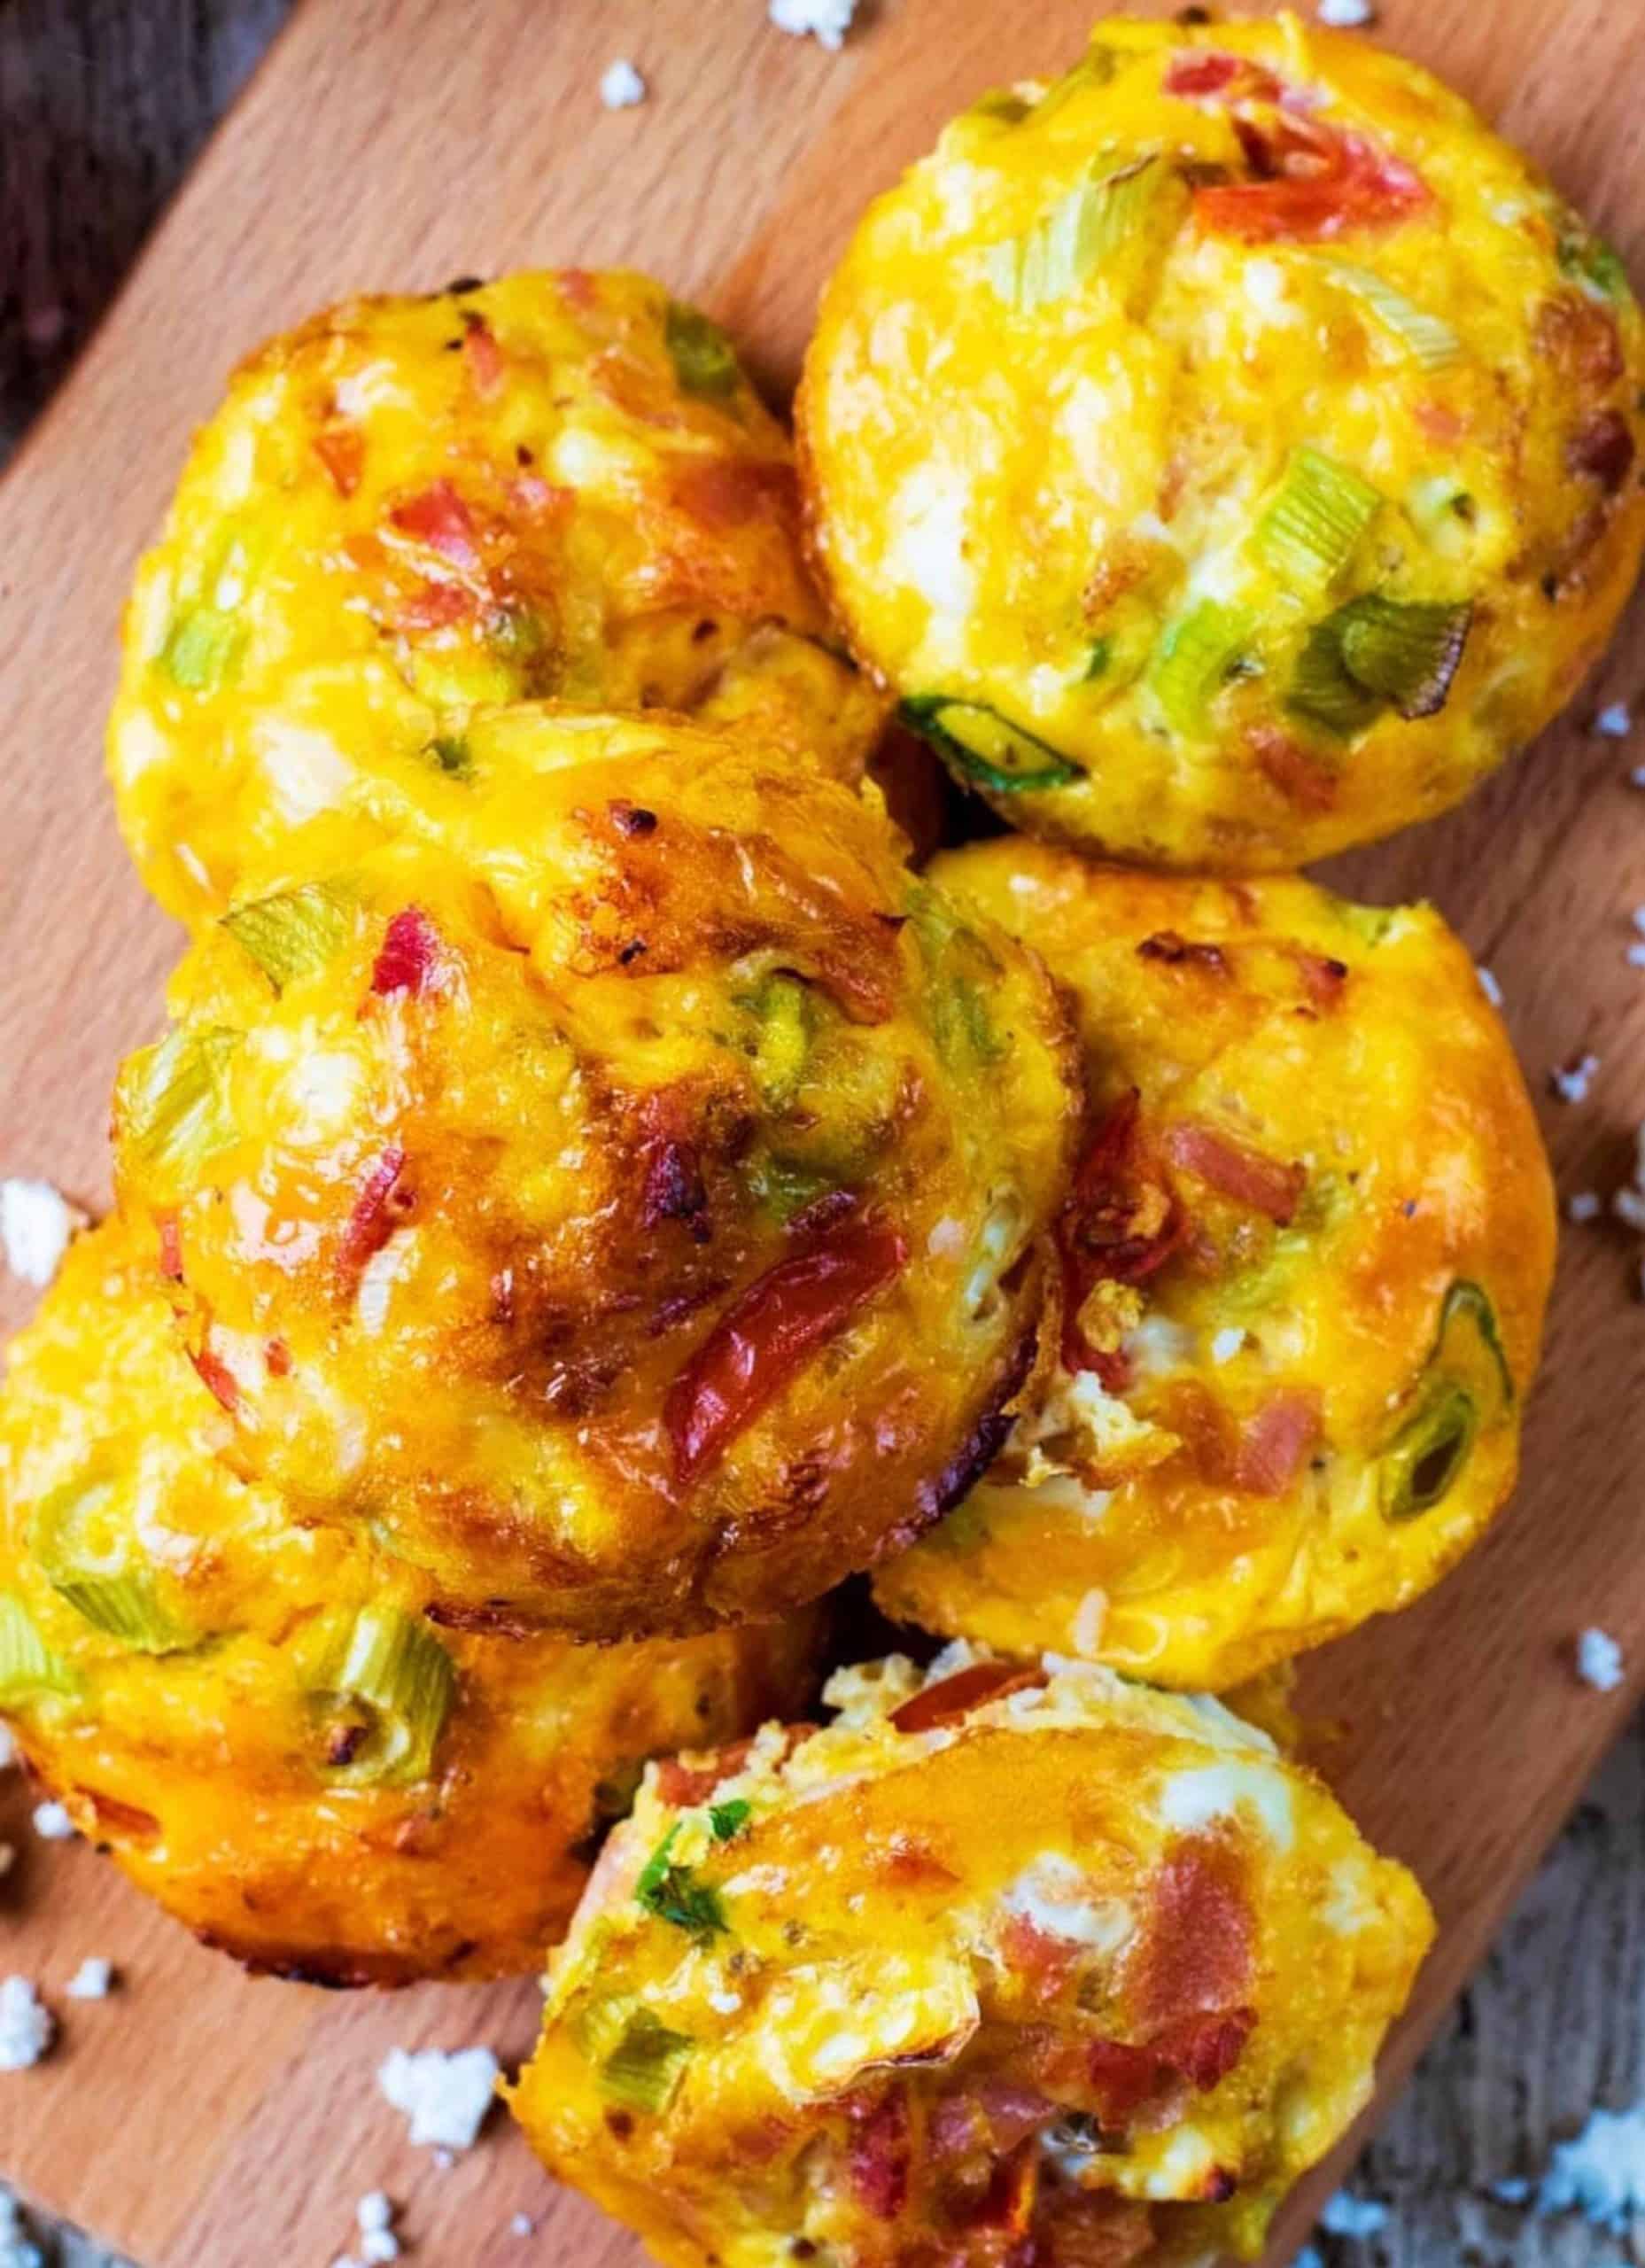 Six egg muffins over a wooden board - Healthy Hungry Happy.